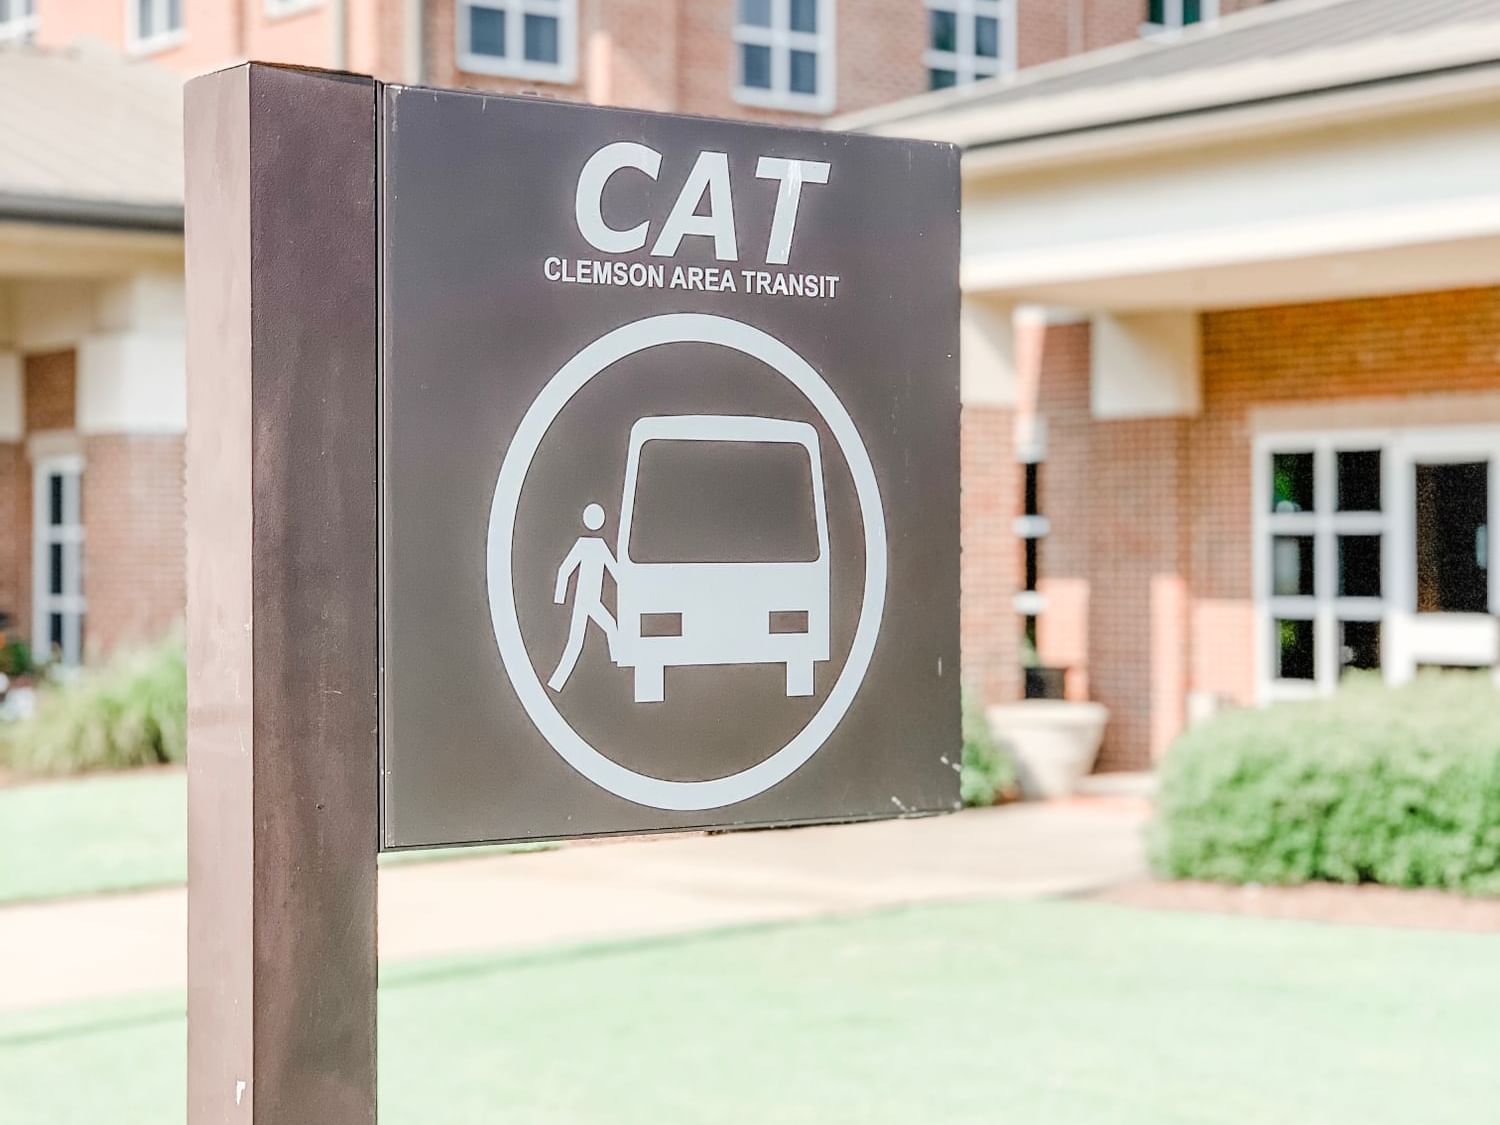 CATbus sign to show Stop in front of hotel building